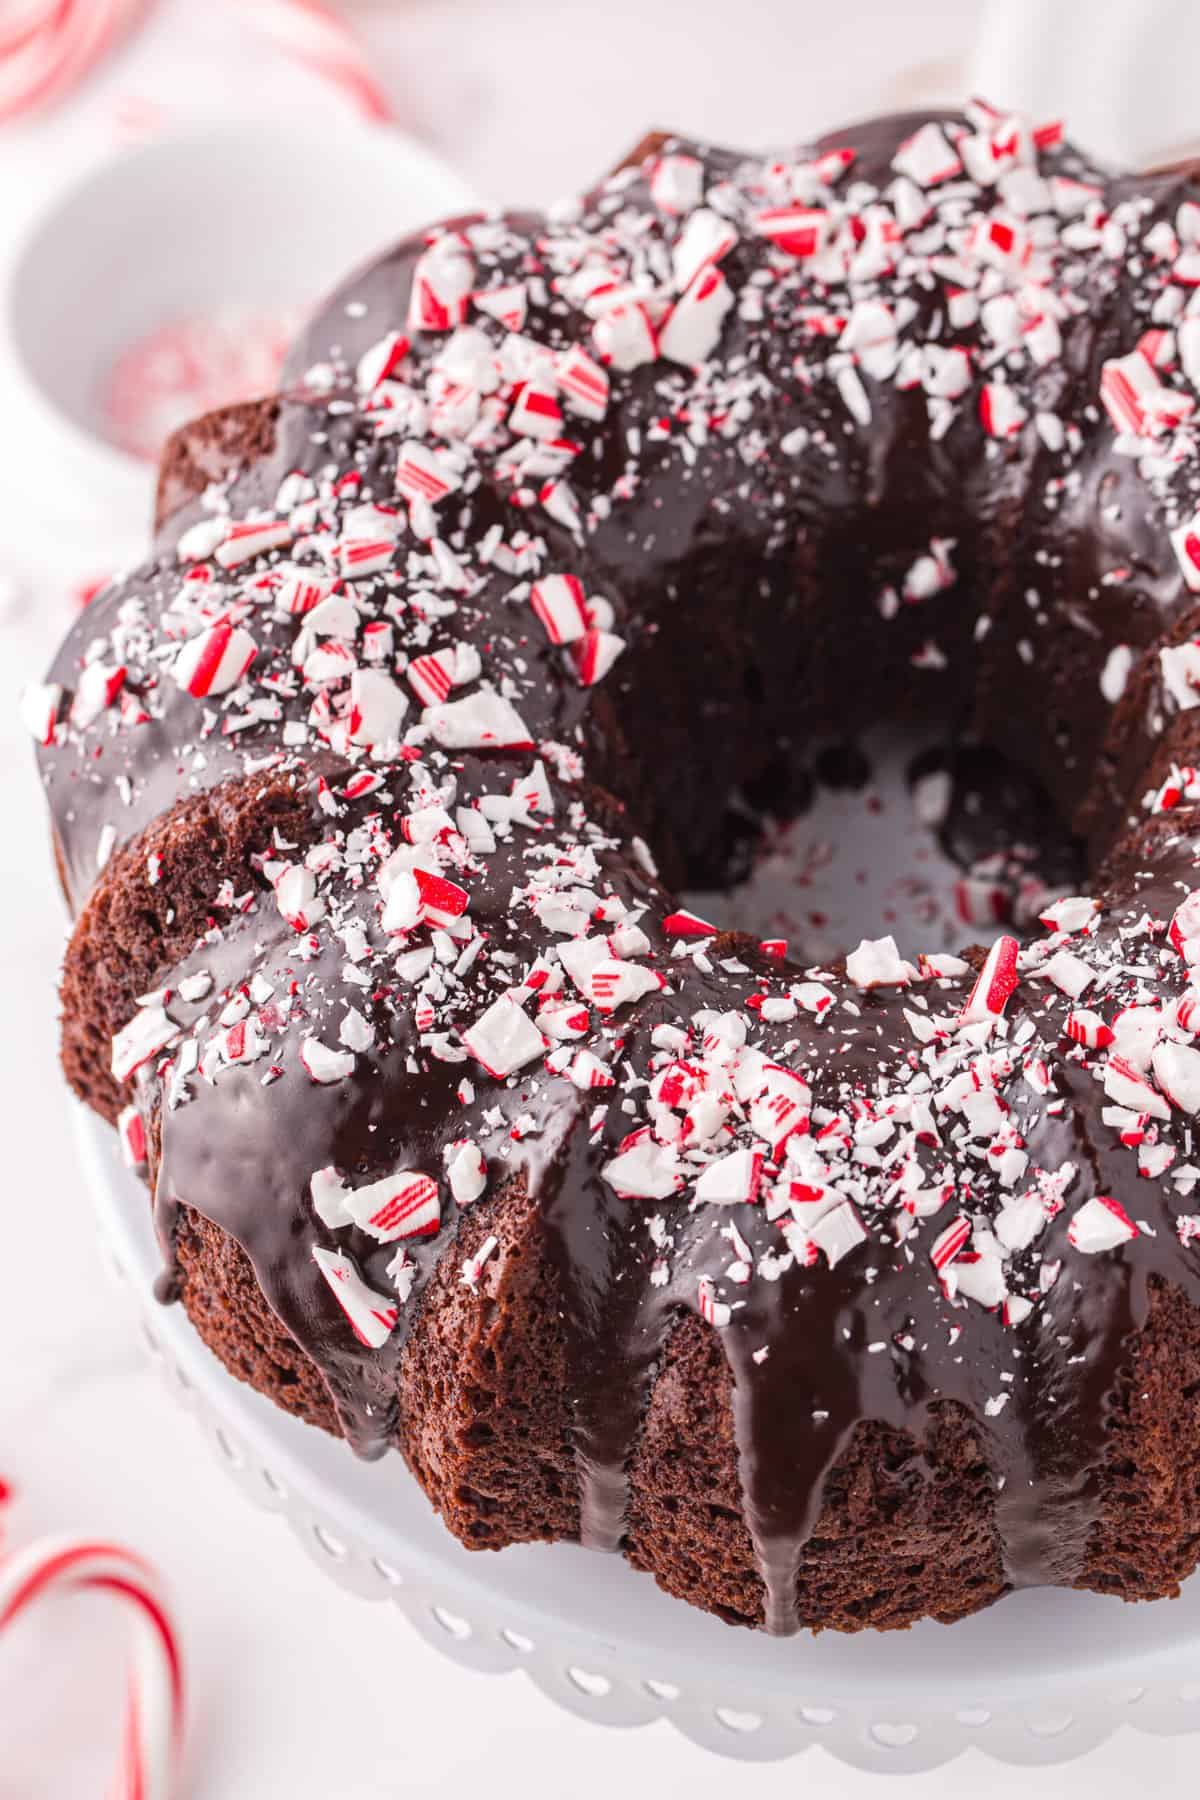 A chocolate bundt cake topped with peppermint ganache is presented on a white cake tray.